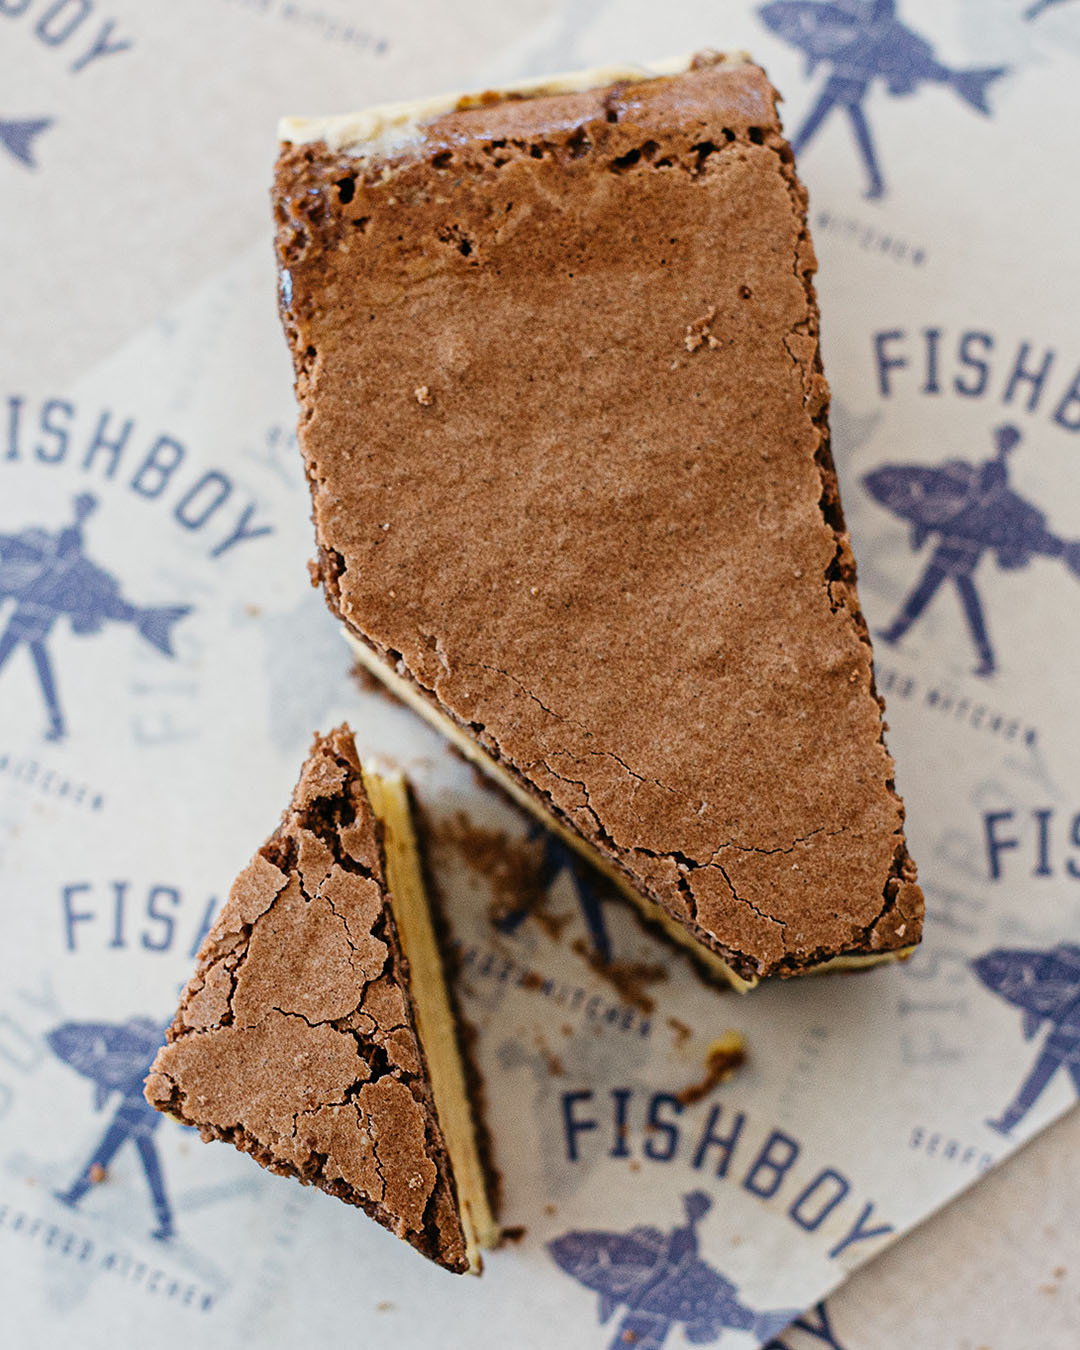 The ice cream sandwich at Fishboy sits on a plate looking delicious.